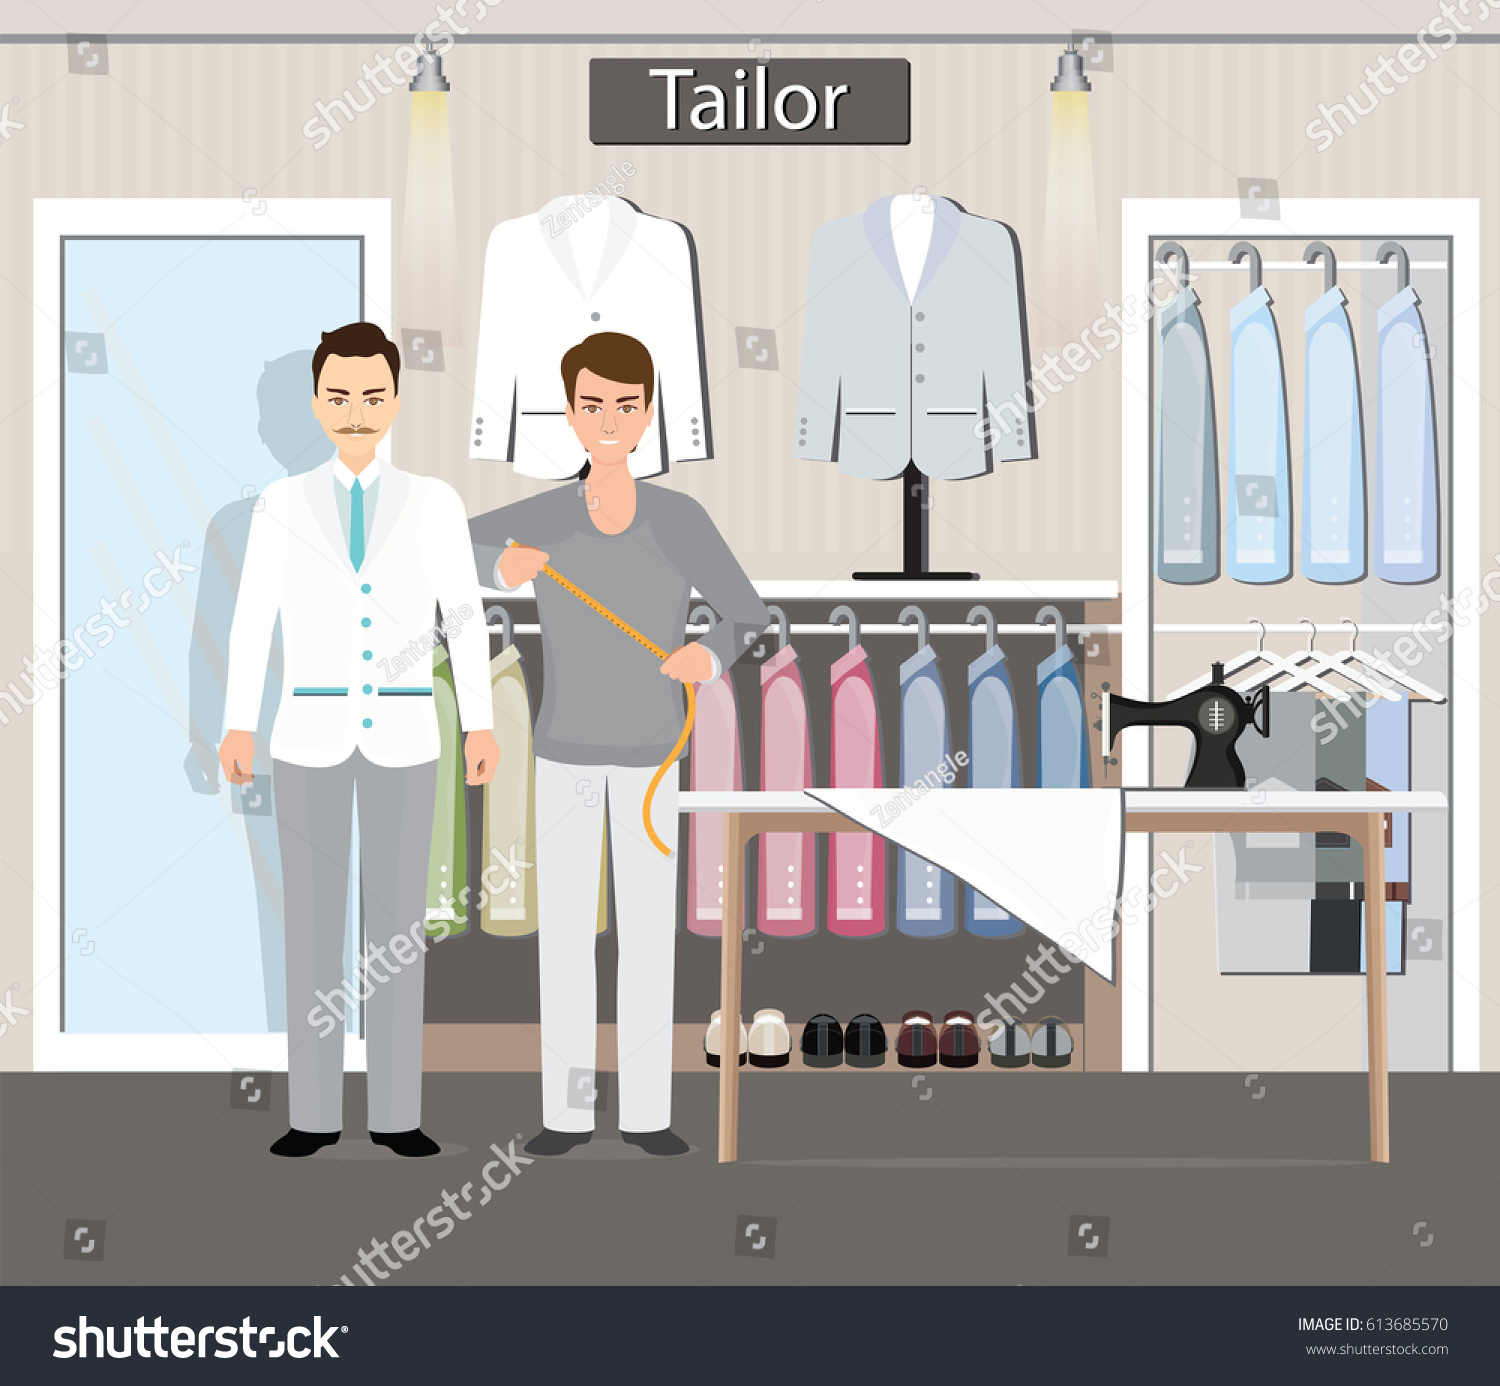 Boutique Indoor Mens Cloths Fashion Tailor Stock Vector 613685570 ...